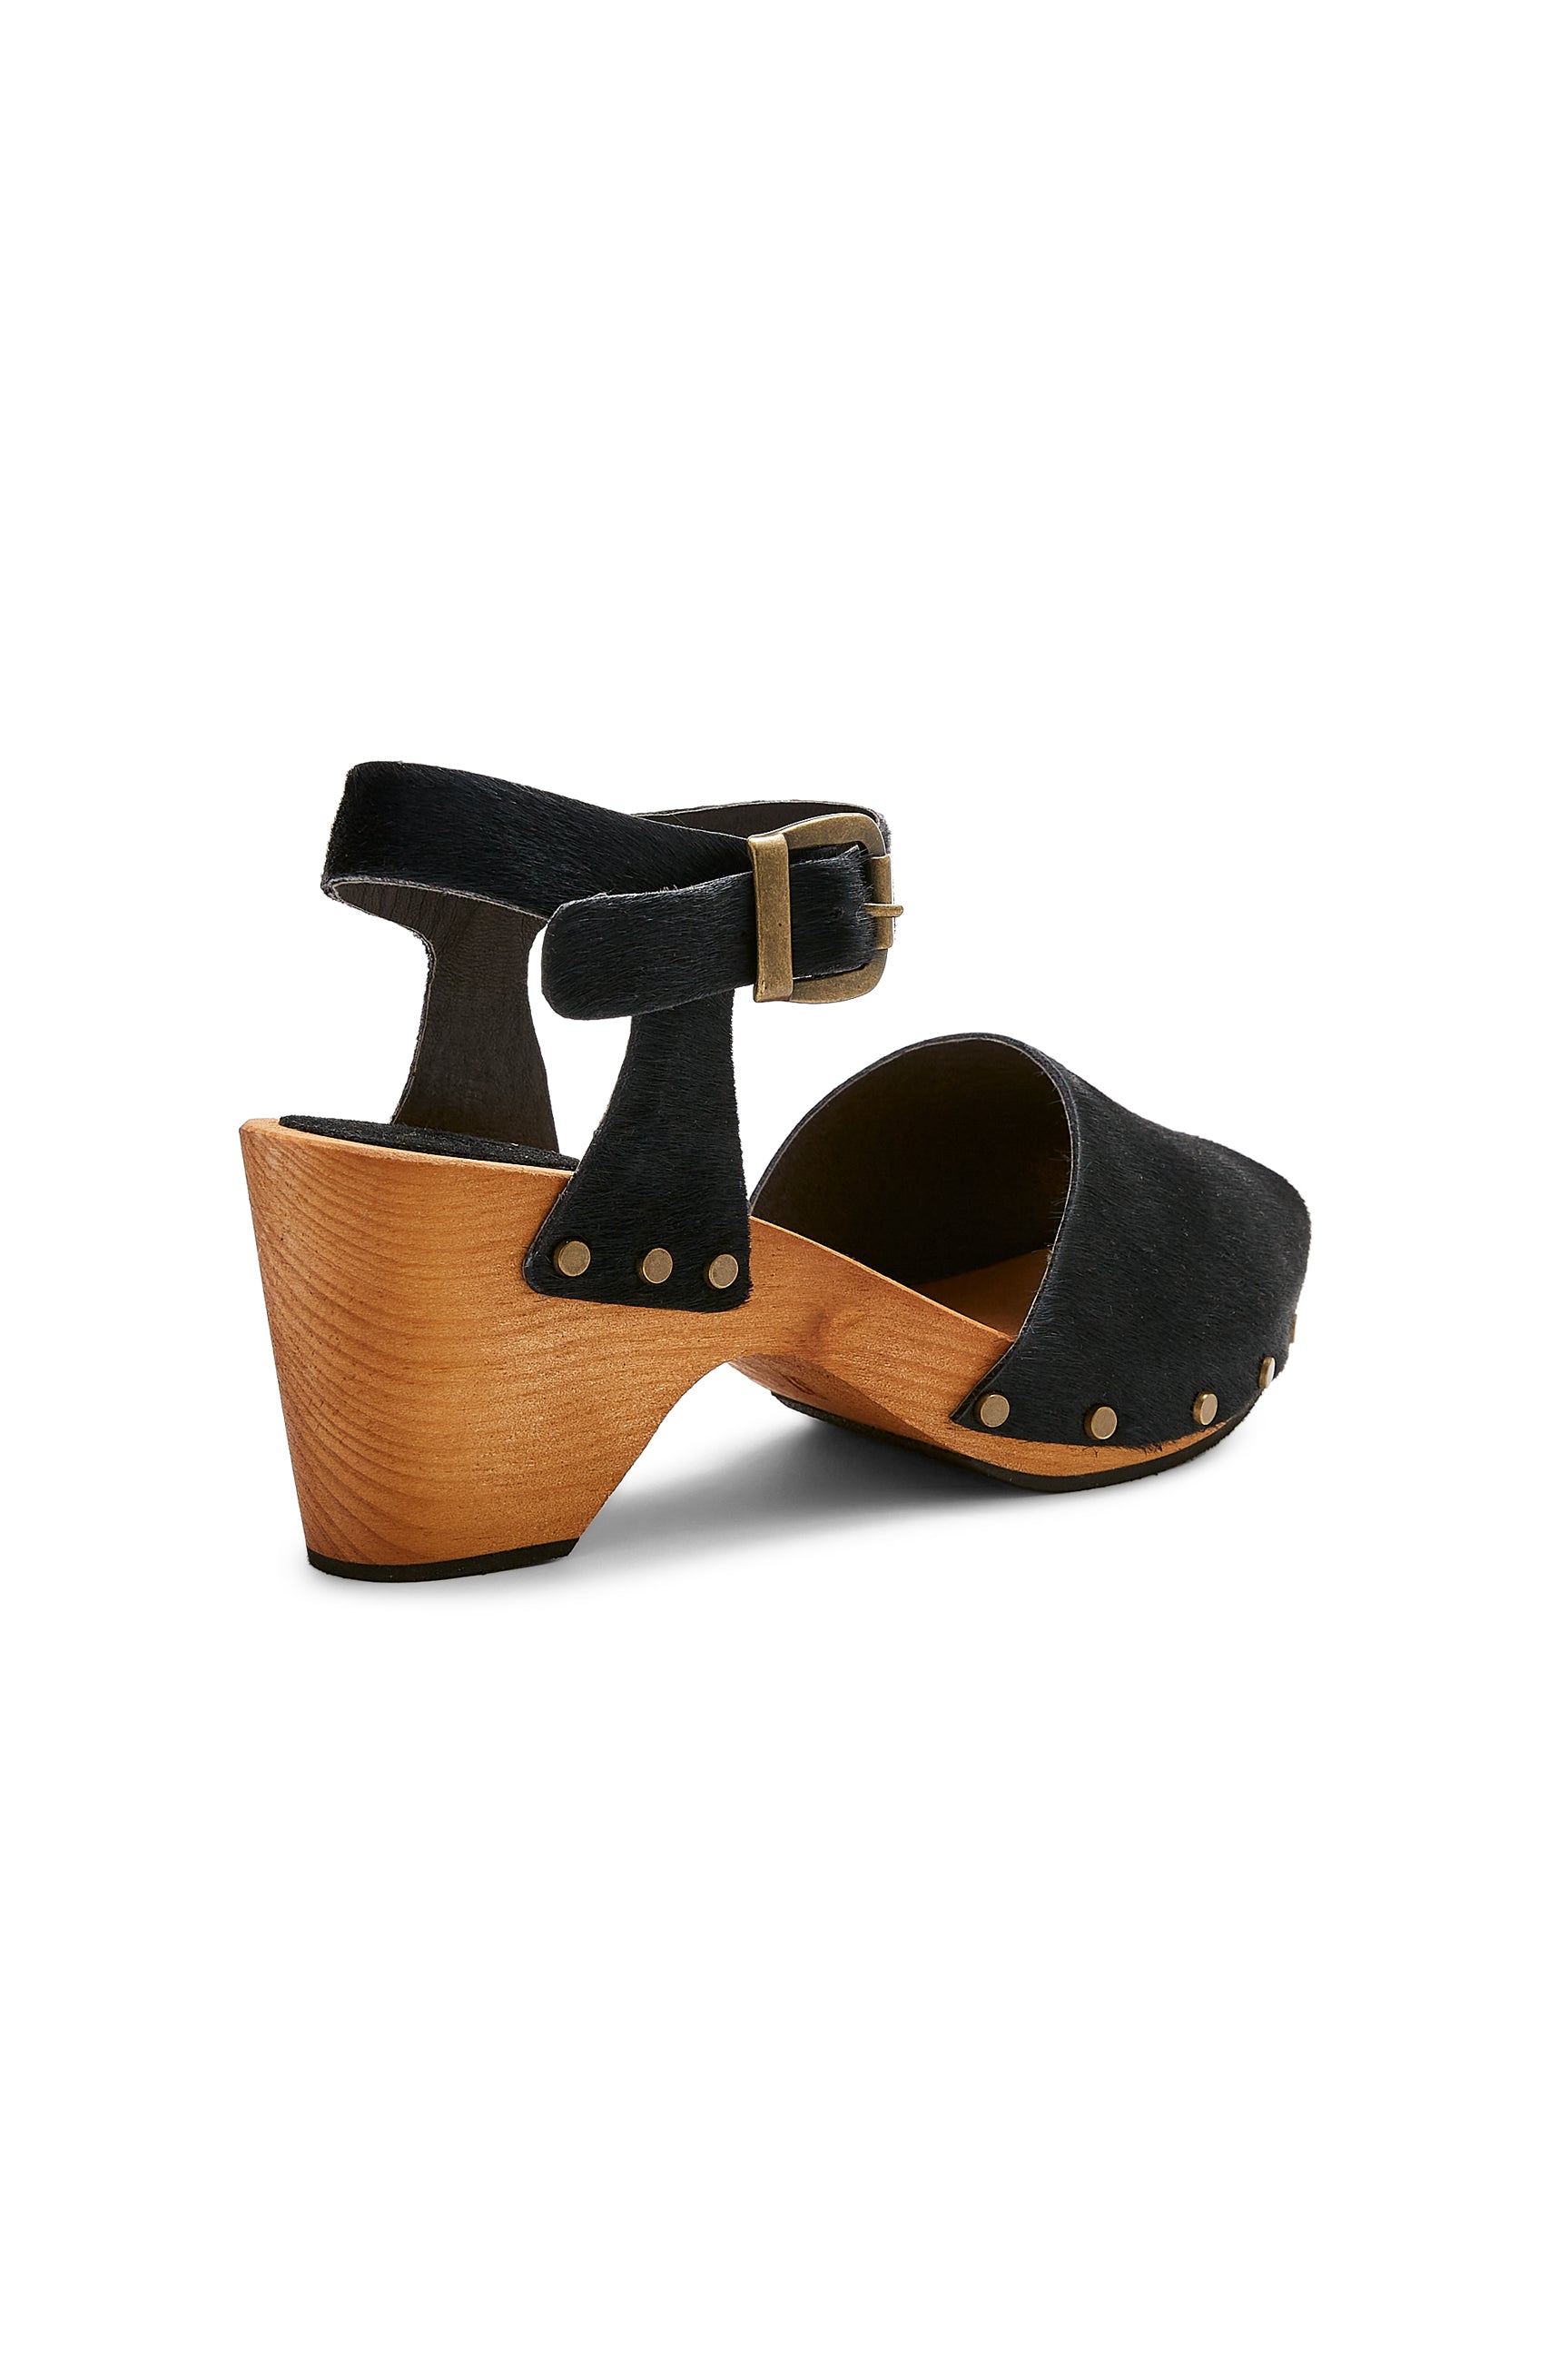 peep toe clogs in black cow hair - ships end of April Clogs lisa b. 